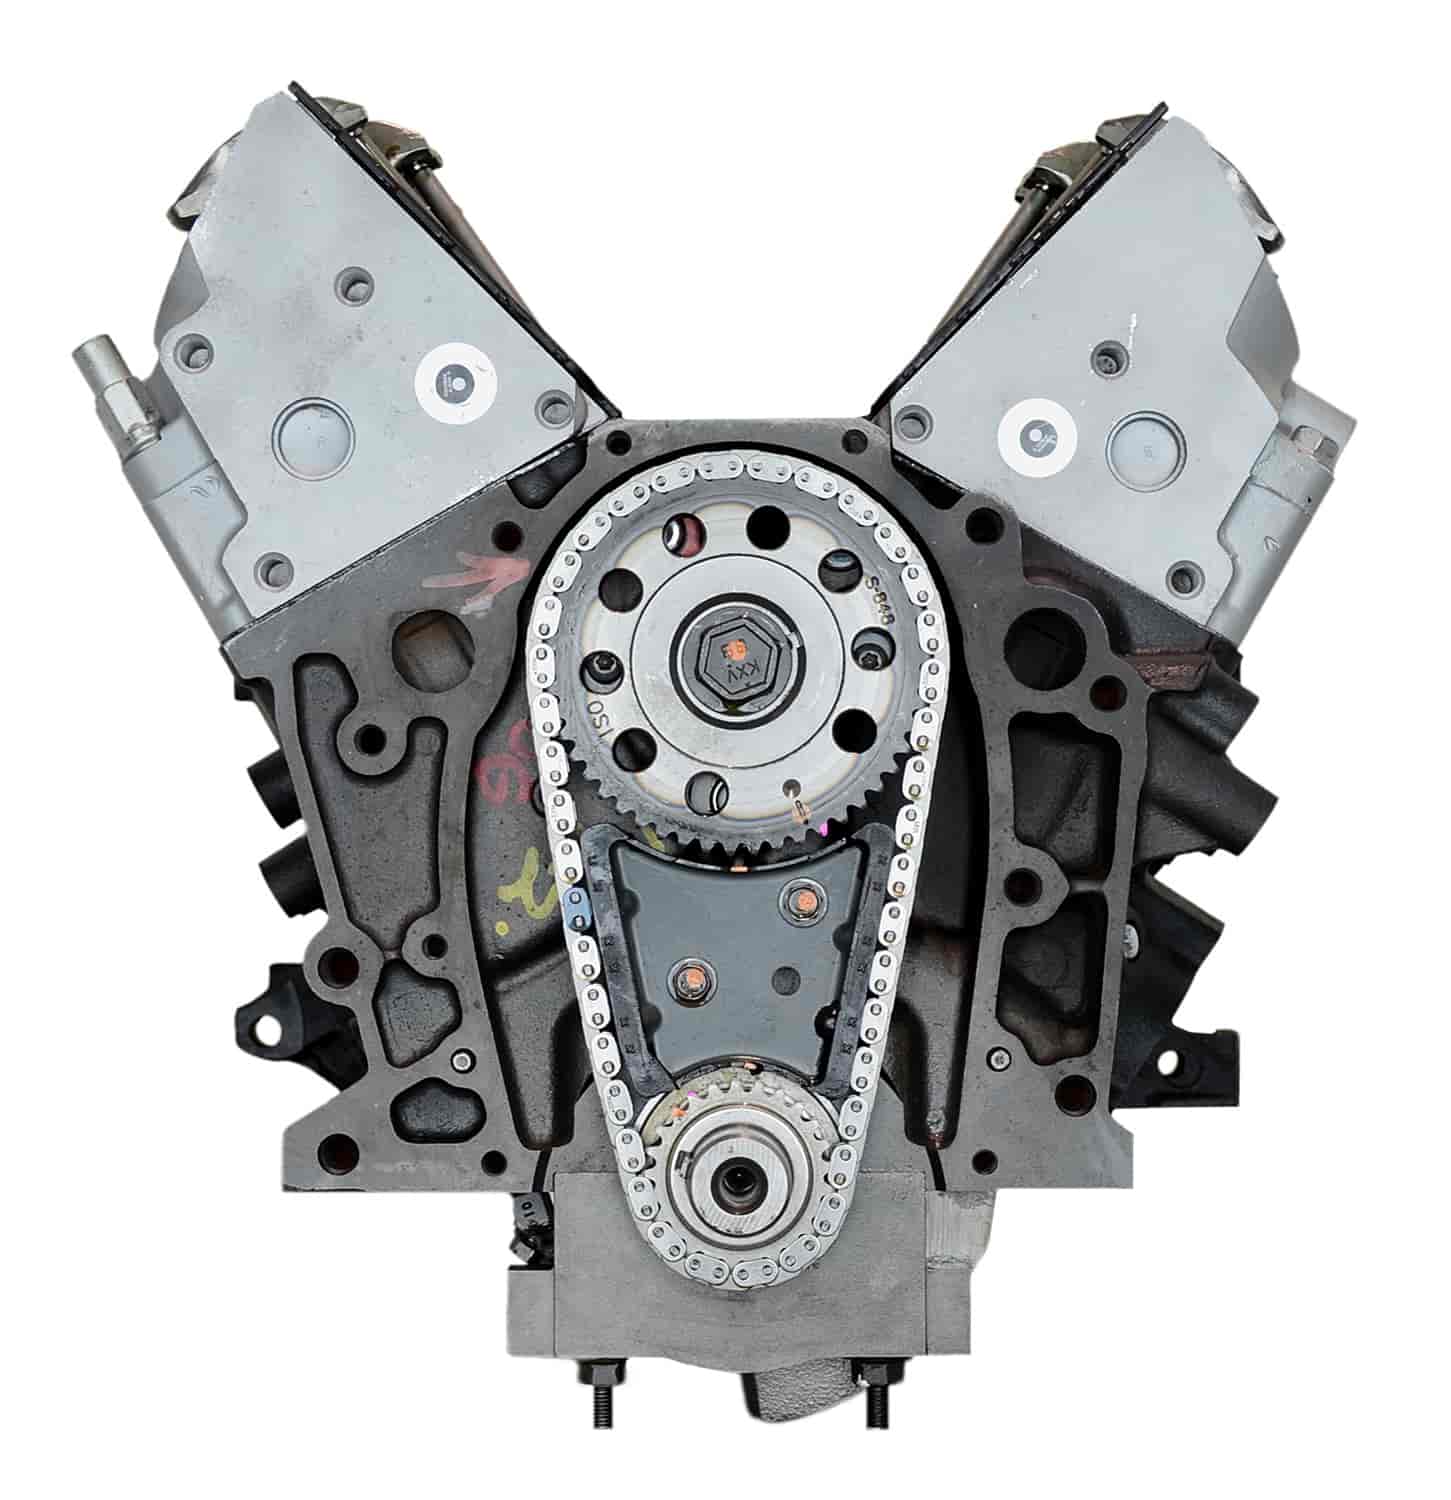 Remanufactured Crate Engine for 2005-2006 Chevy Equinox & Pontiac Torrent with 3.4L V6